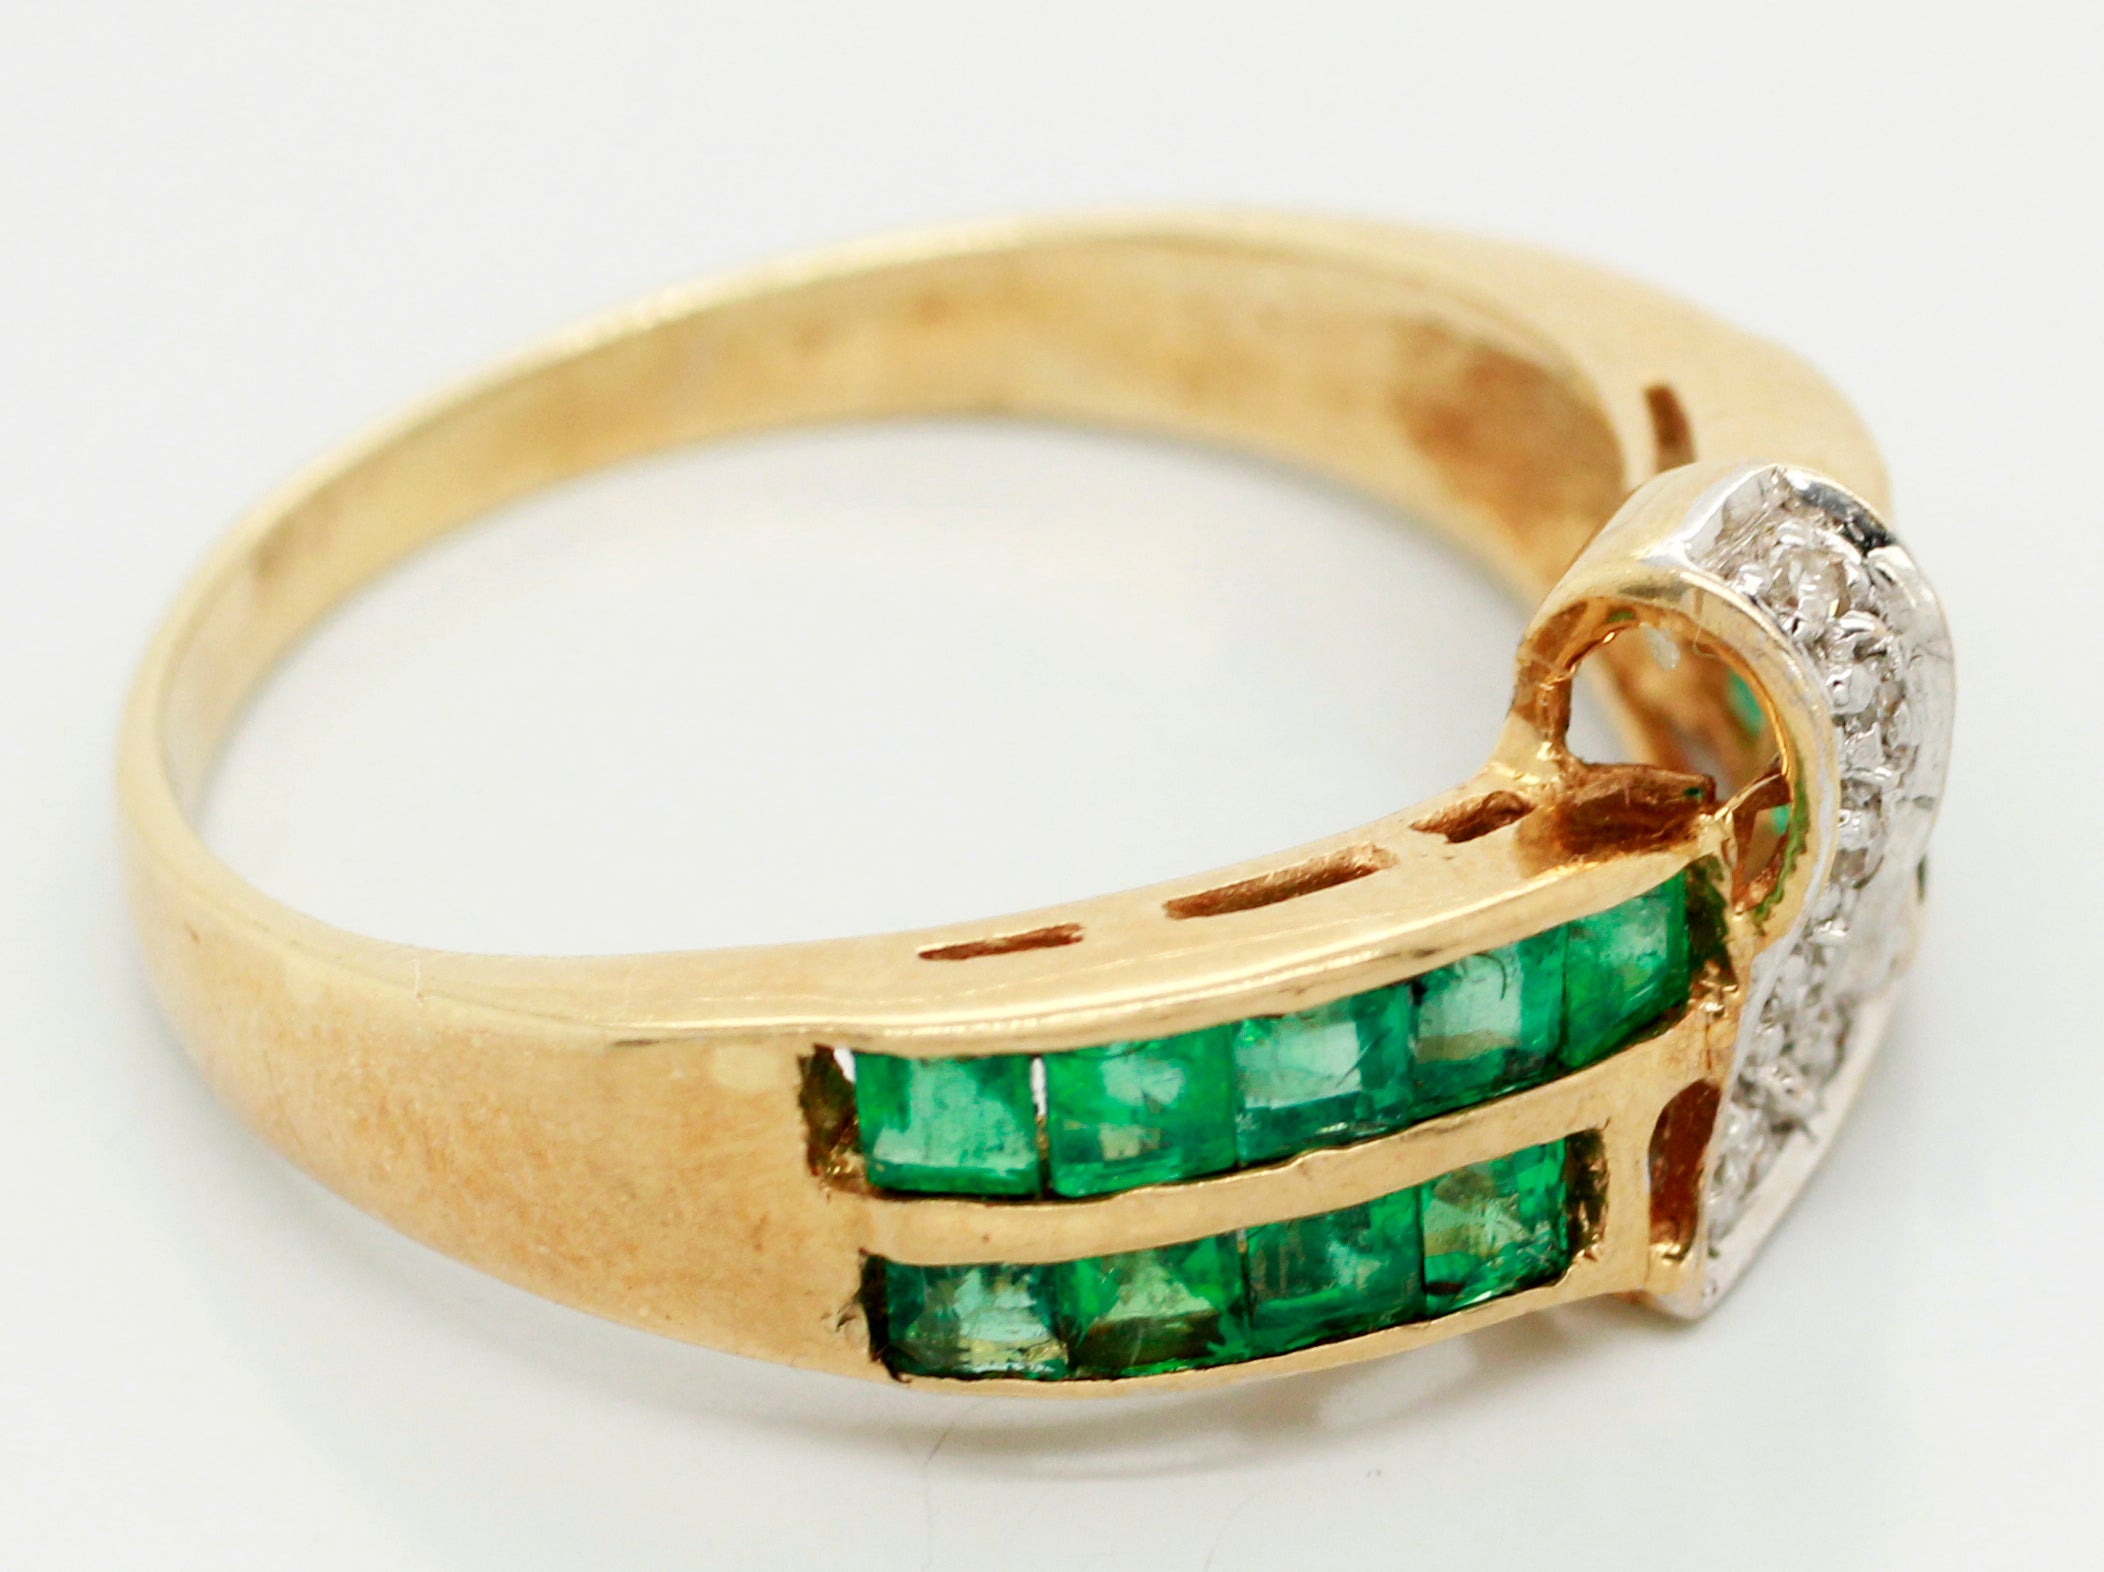 Vintage 0.60ctw Emerald and 0.15ctw Diamond Two Row Band Ring - 14k Yellow Gold